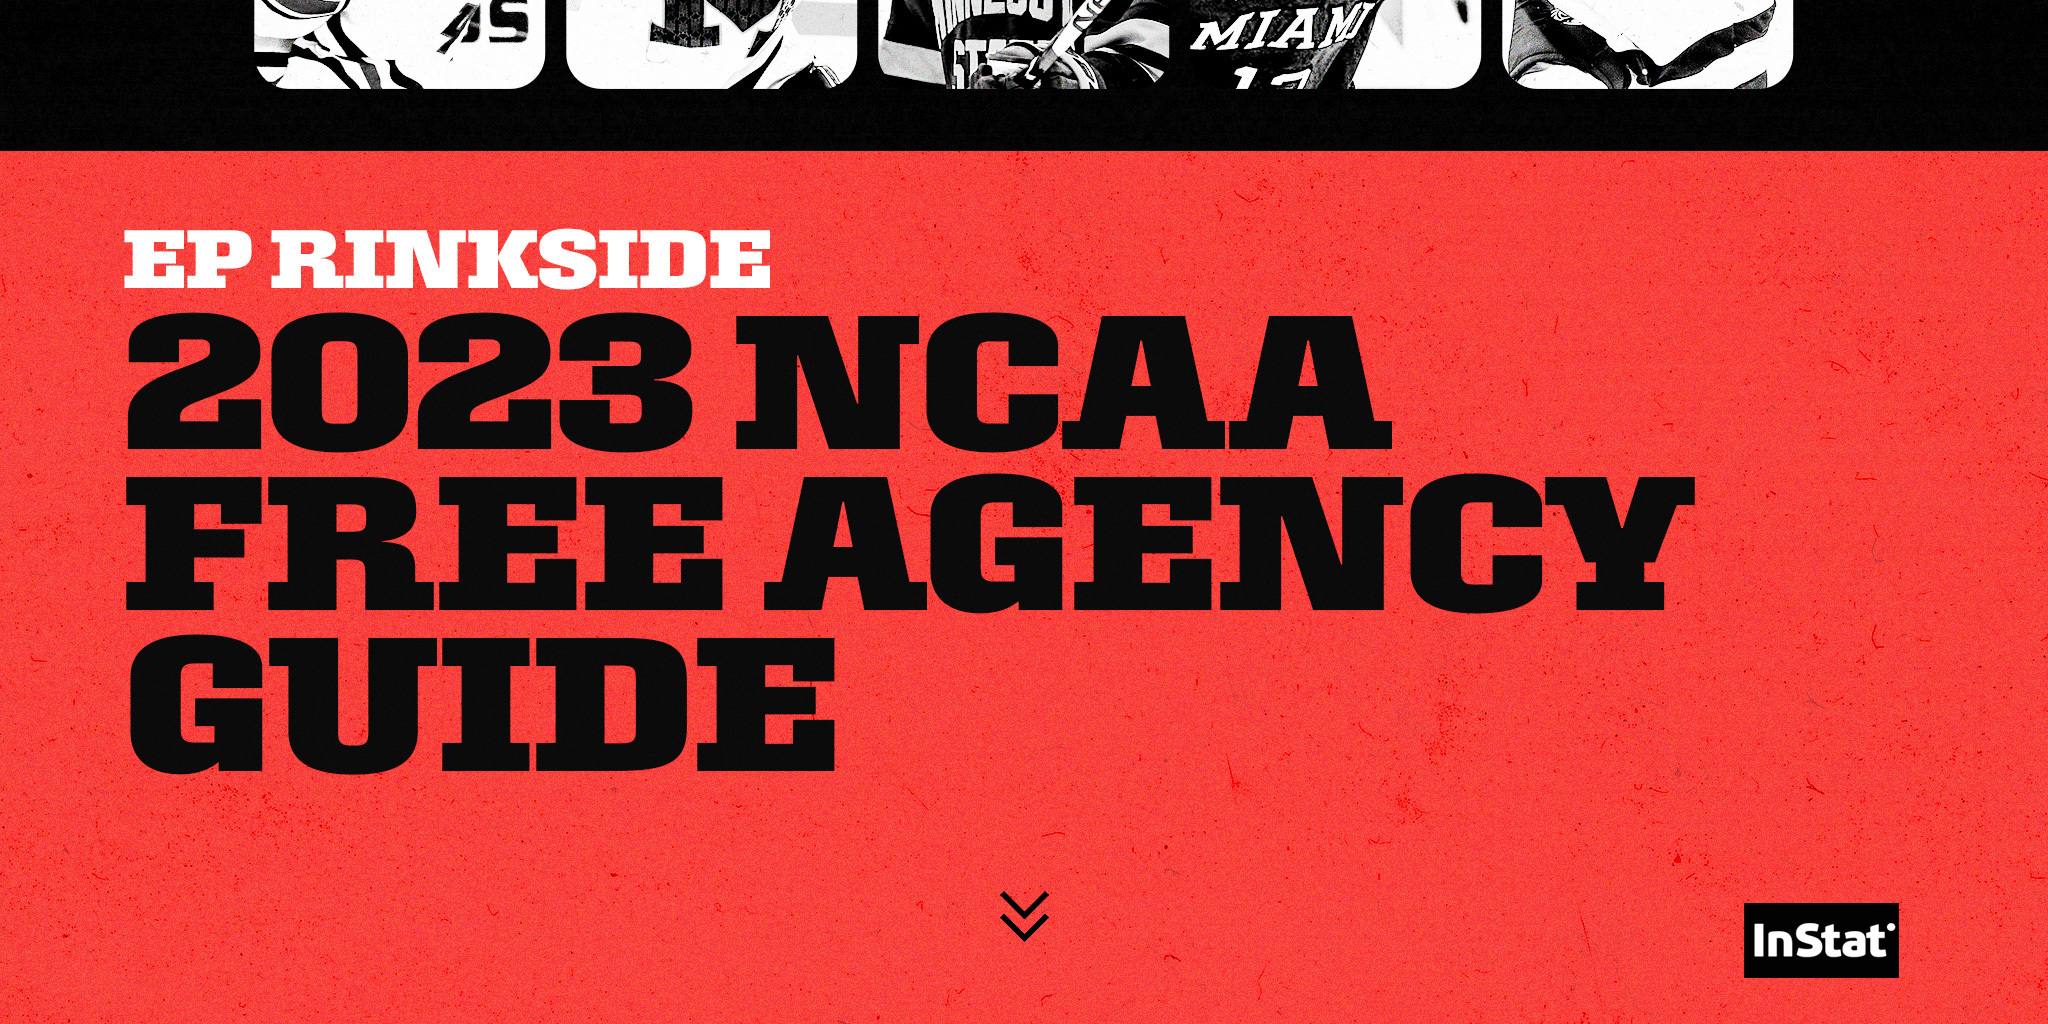 The EP Rinkside 2023 NCAA Free Agency Guide